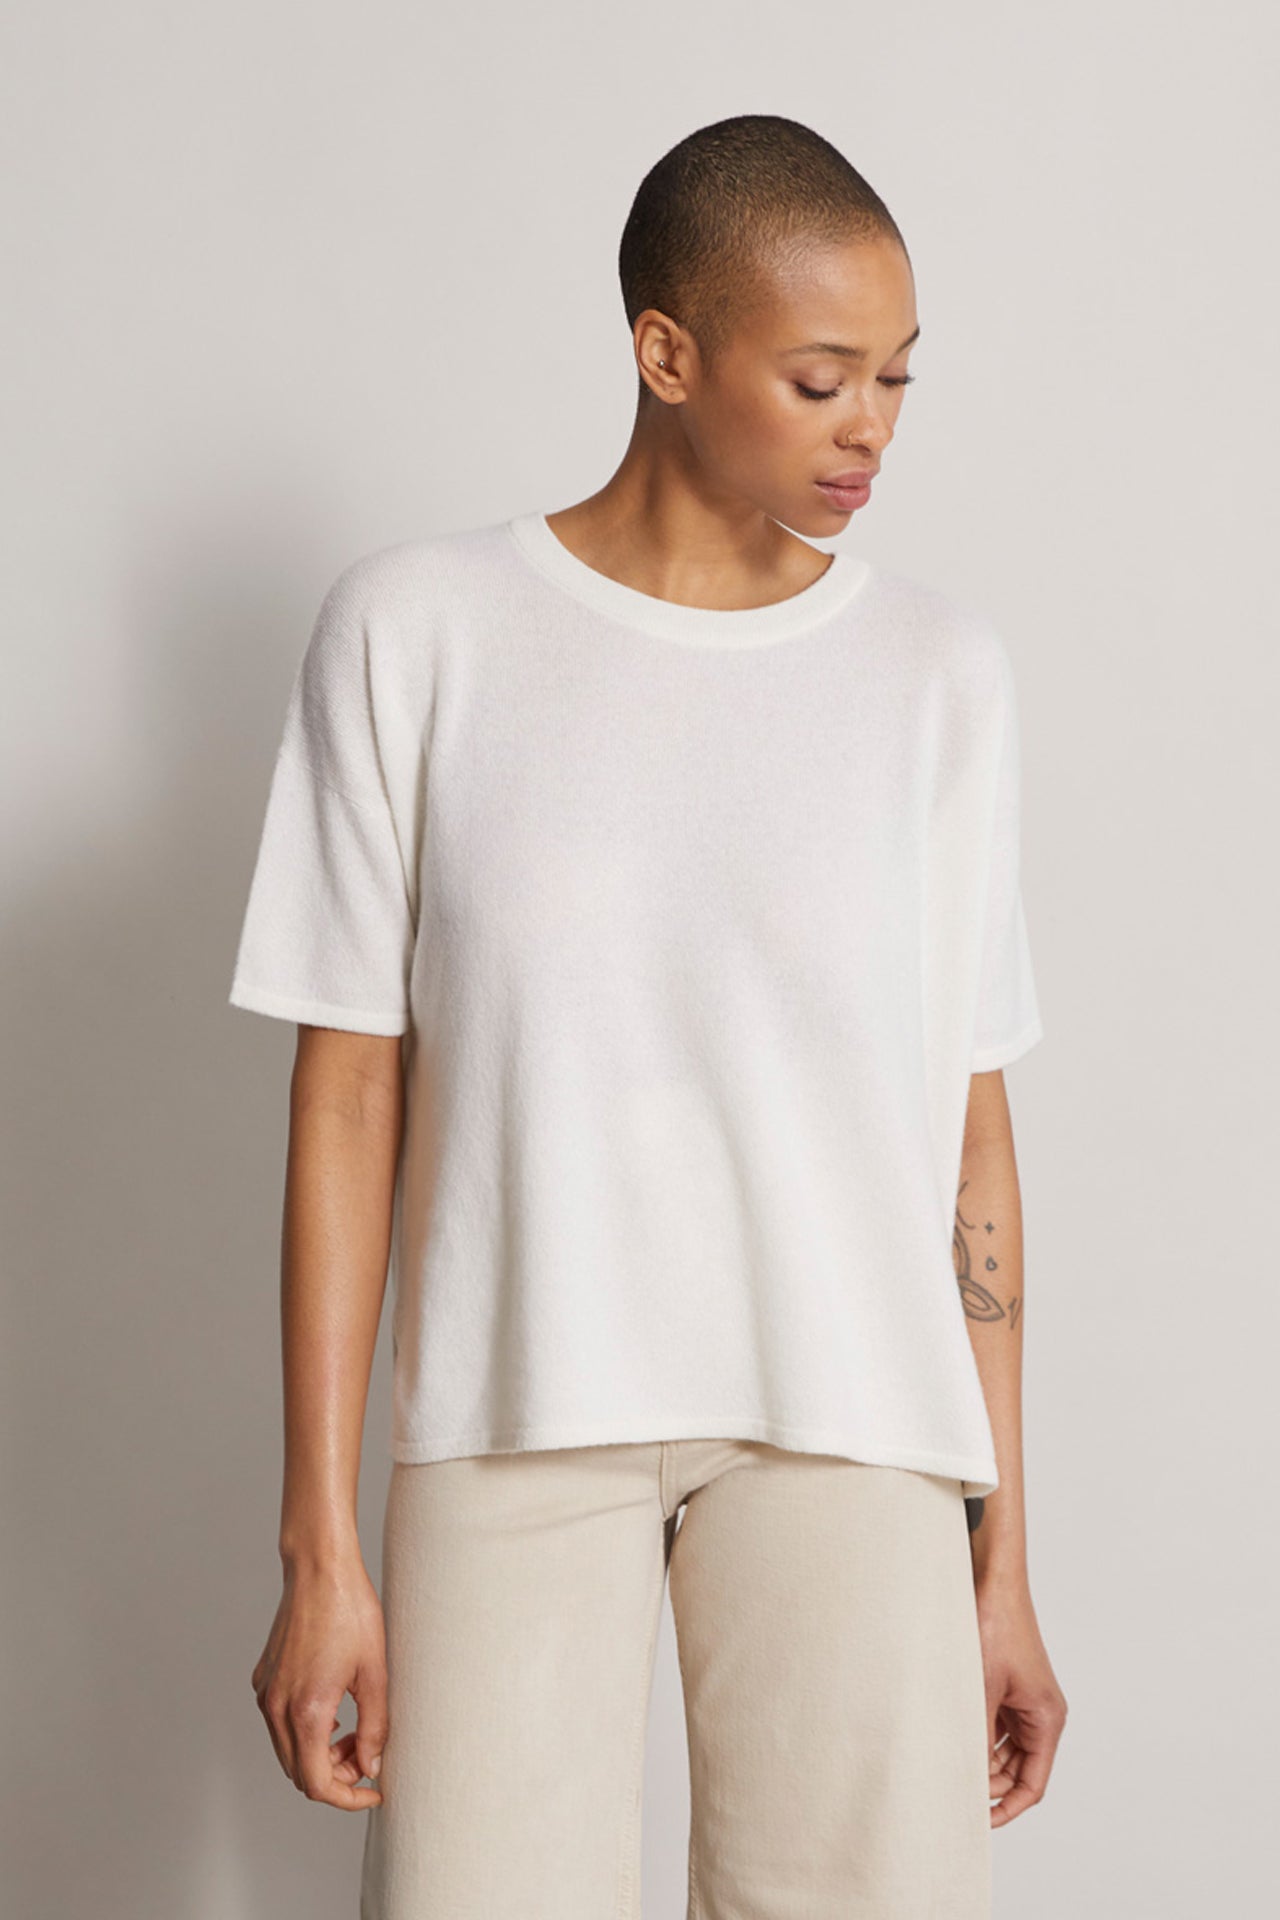 Caorle knitted t-shirt in summer cashmere